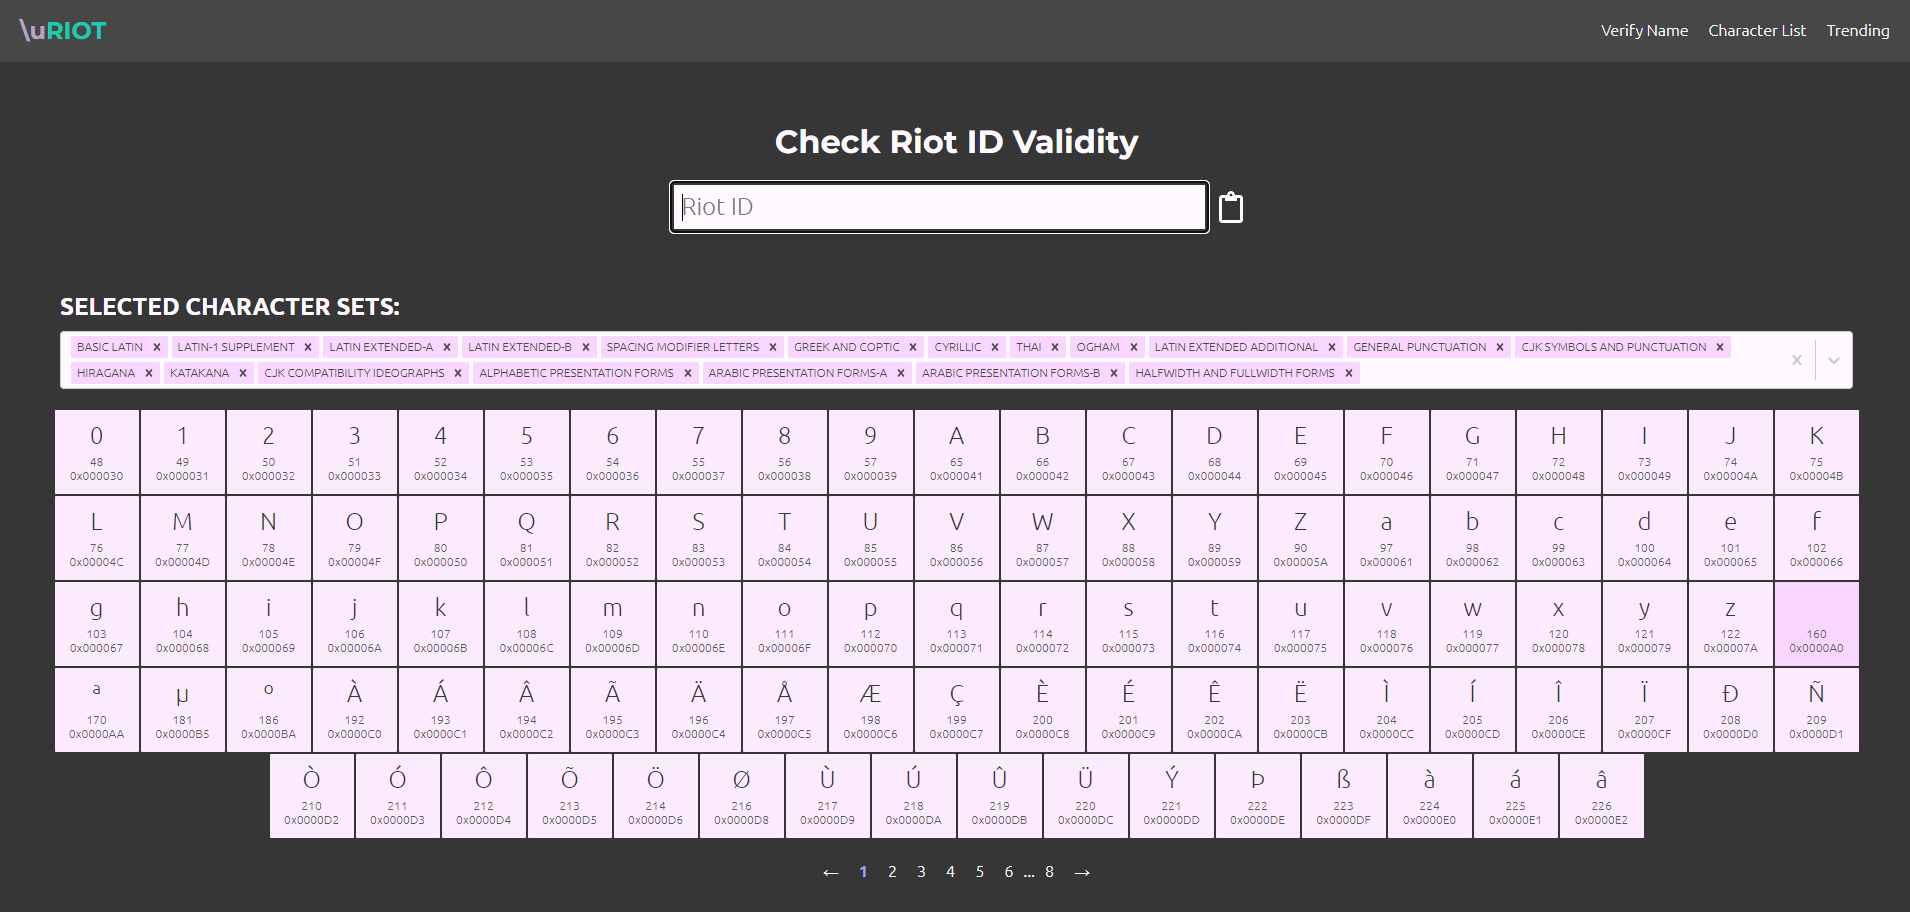 A screenshot of the Riot ID validity screen